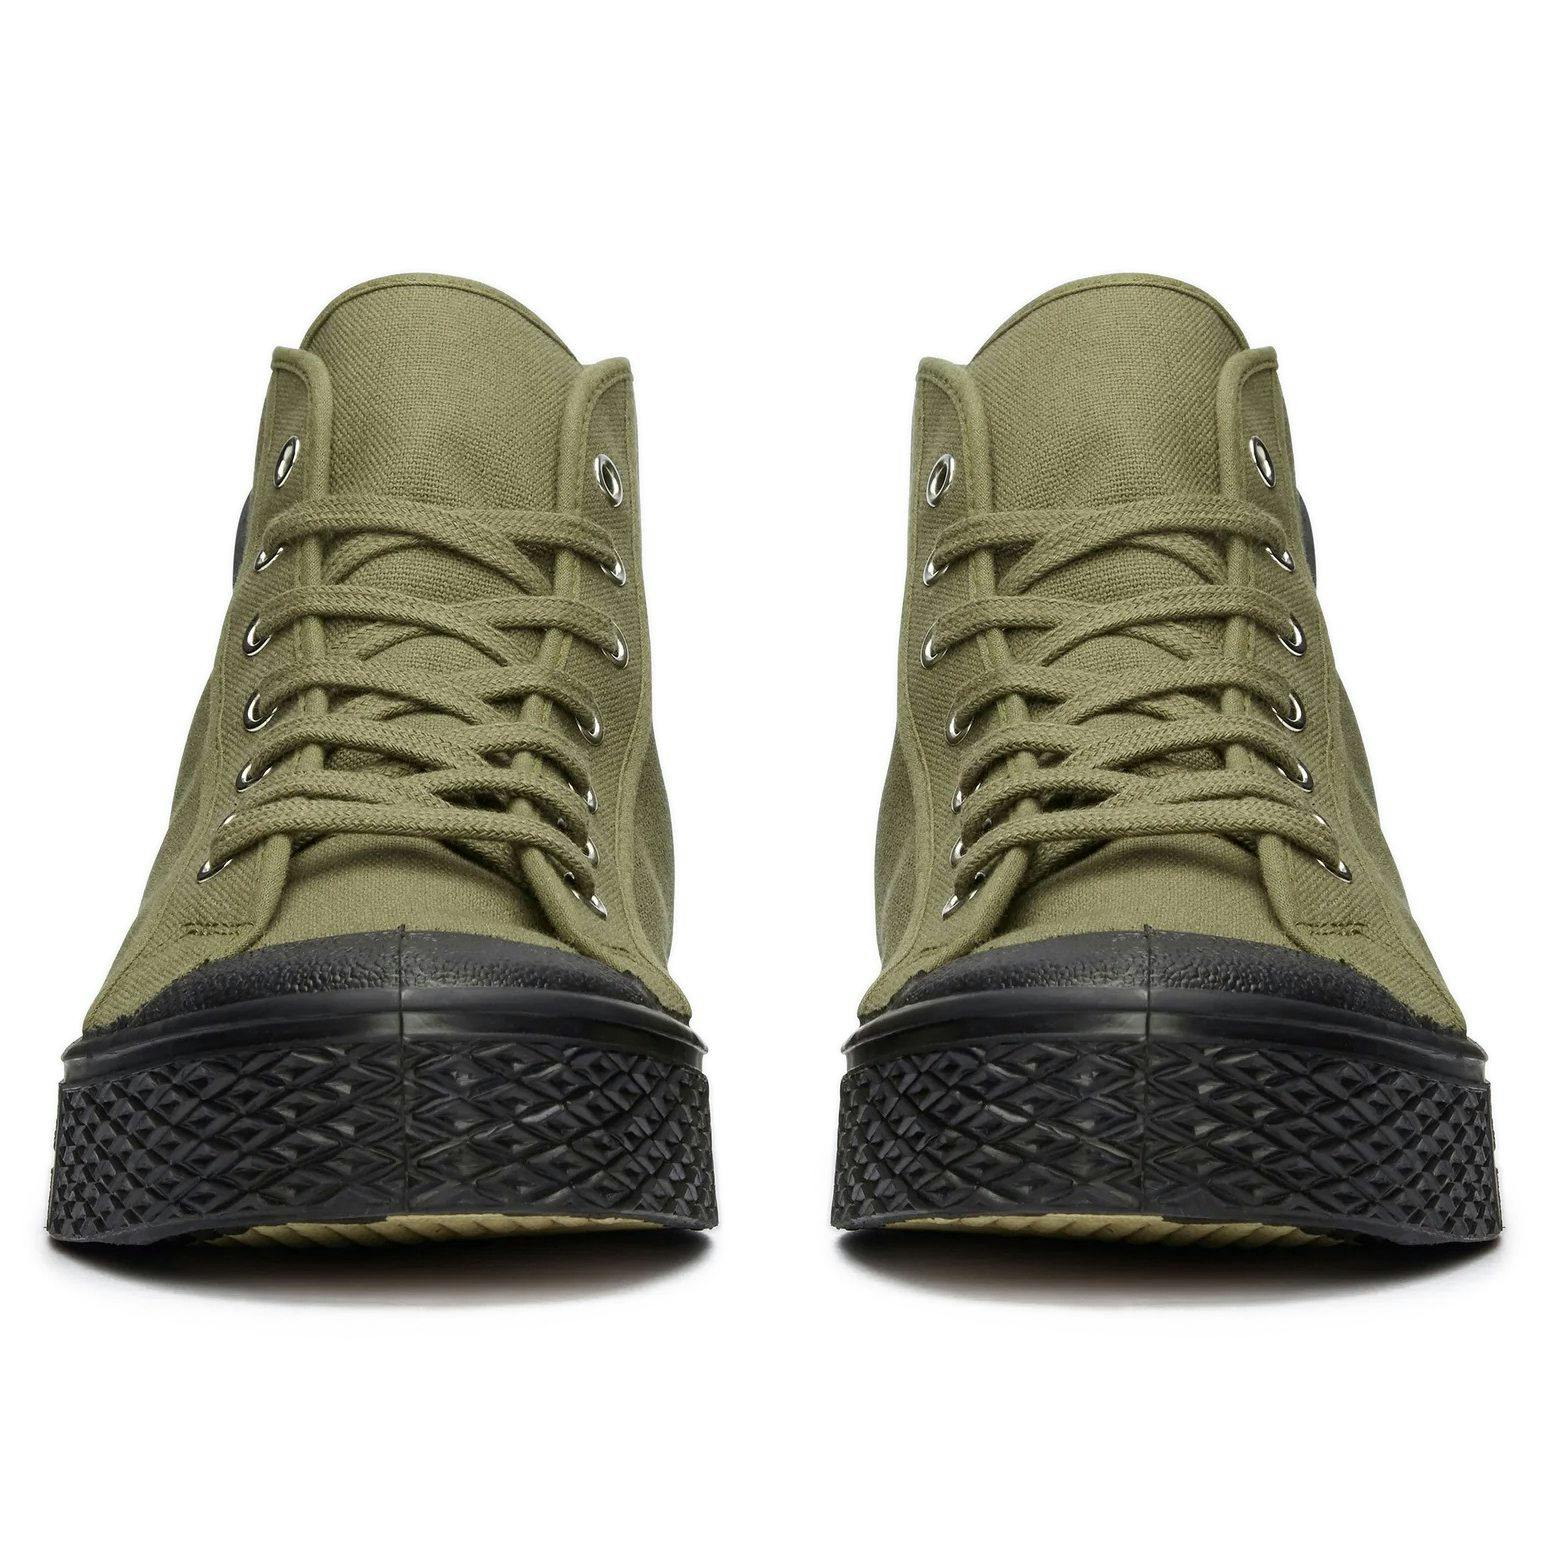 US Rubber CO. Military High Top Sneaker - Military Green Casual Sneakers | Huckberry